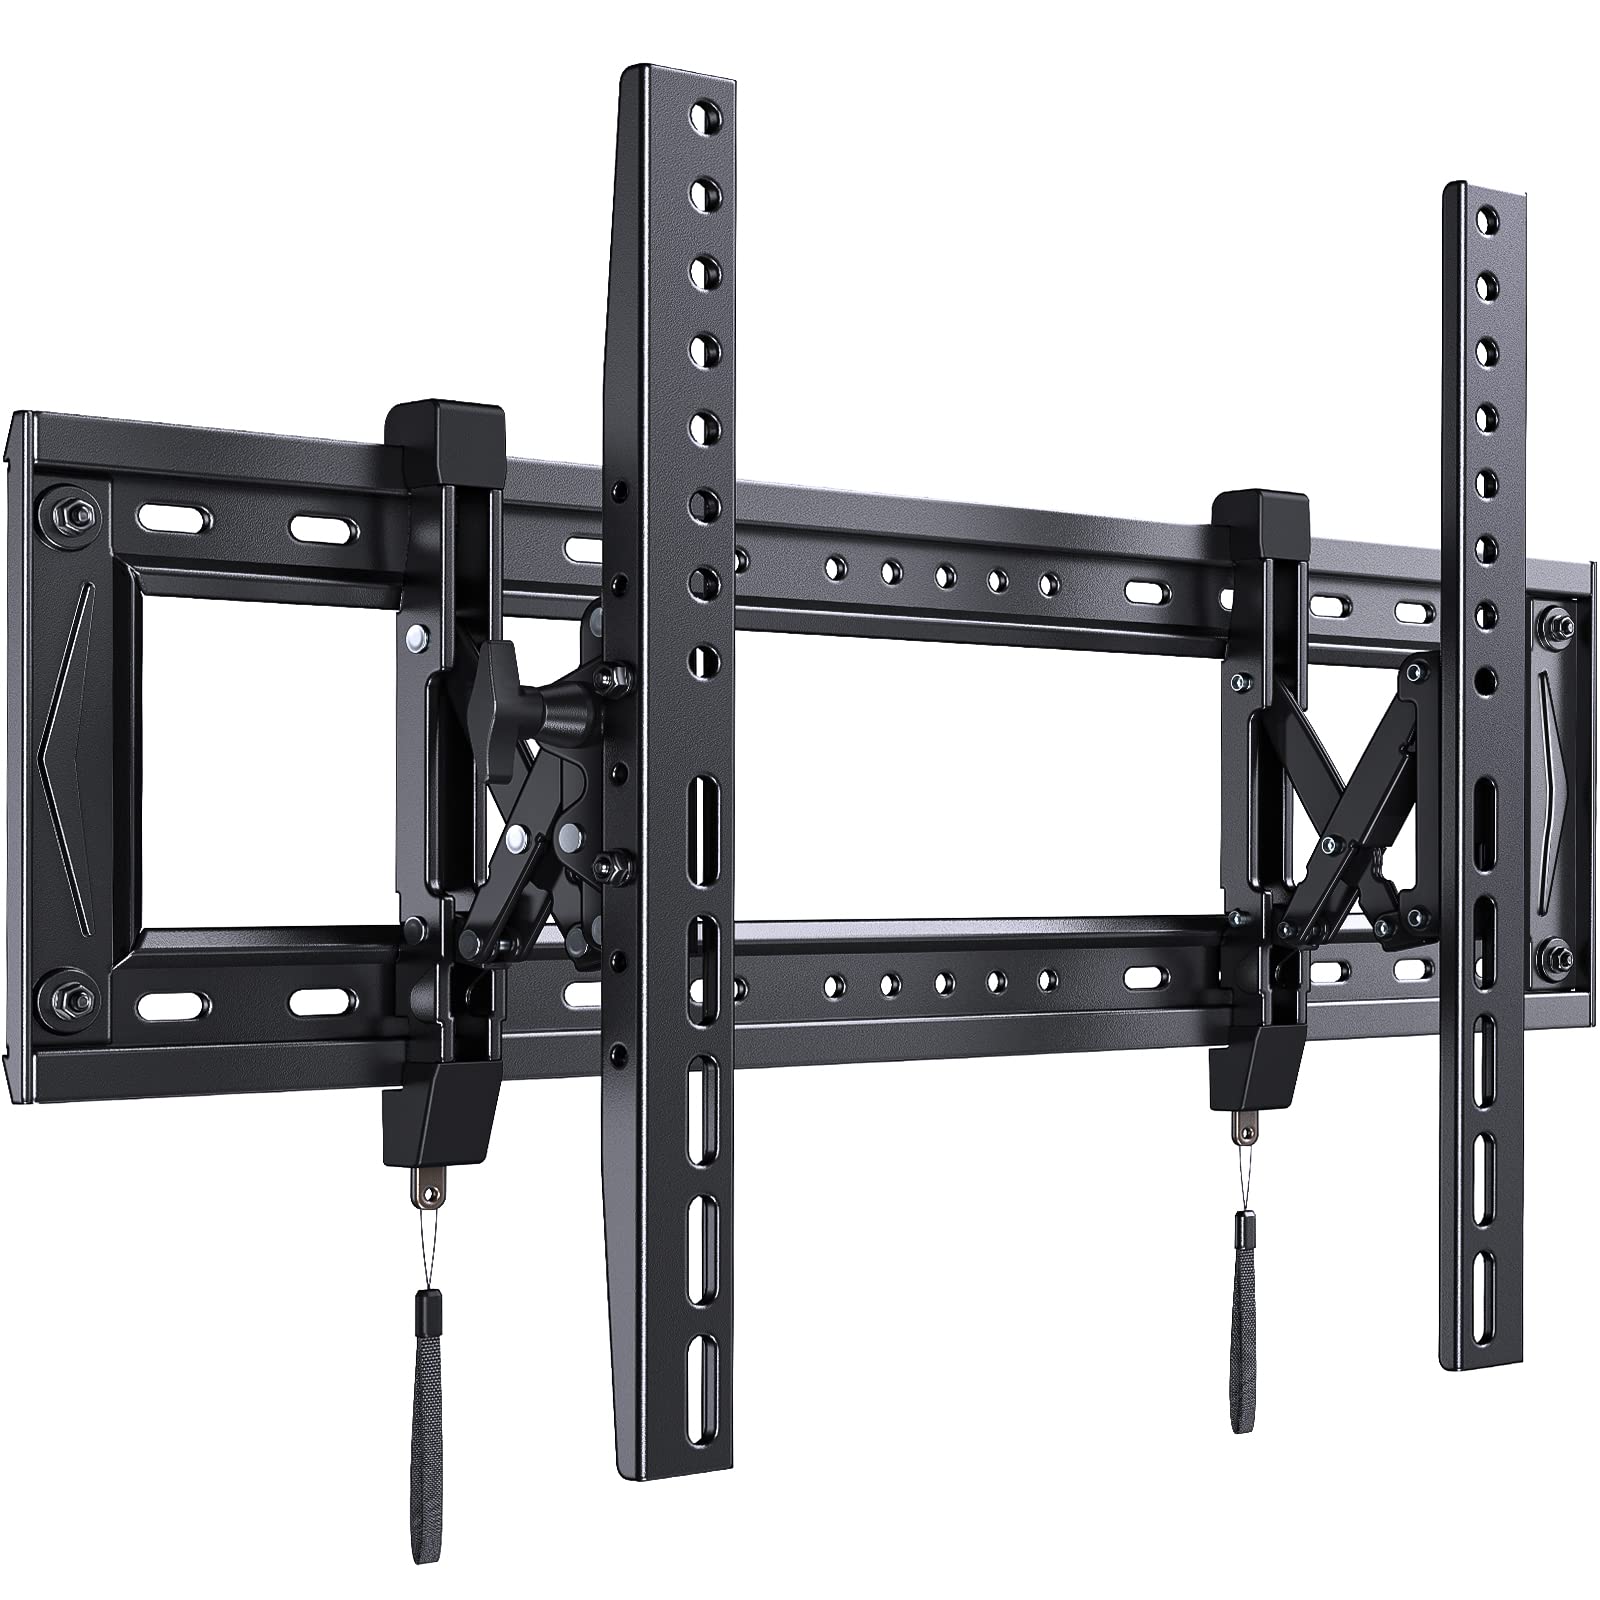 Pipishell Advanced Tilt TV Wall Mount Bracket Extentable for Most 50-90 inch 4K OLED QLED LCD LED Flat and Curved TVs up to 132 lbs, Max VESA 600x400mm, Fits 16, 18, 24 Inch Wood Stud Spacing